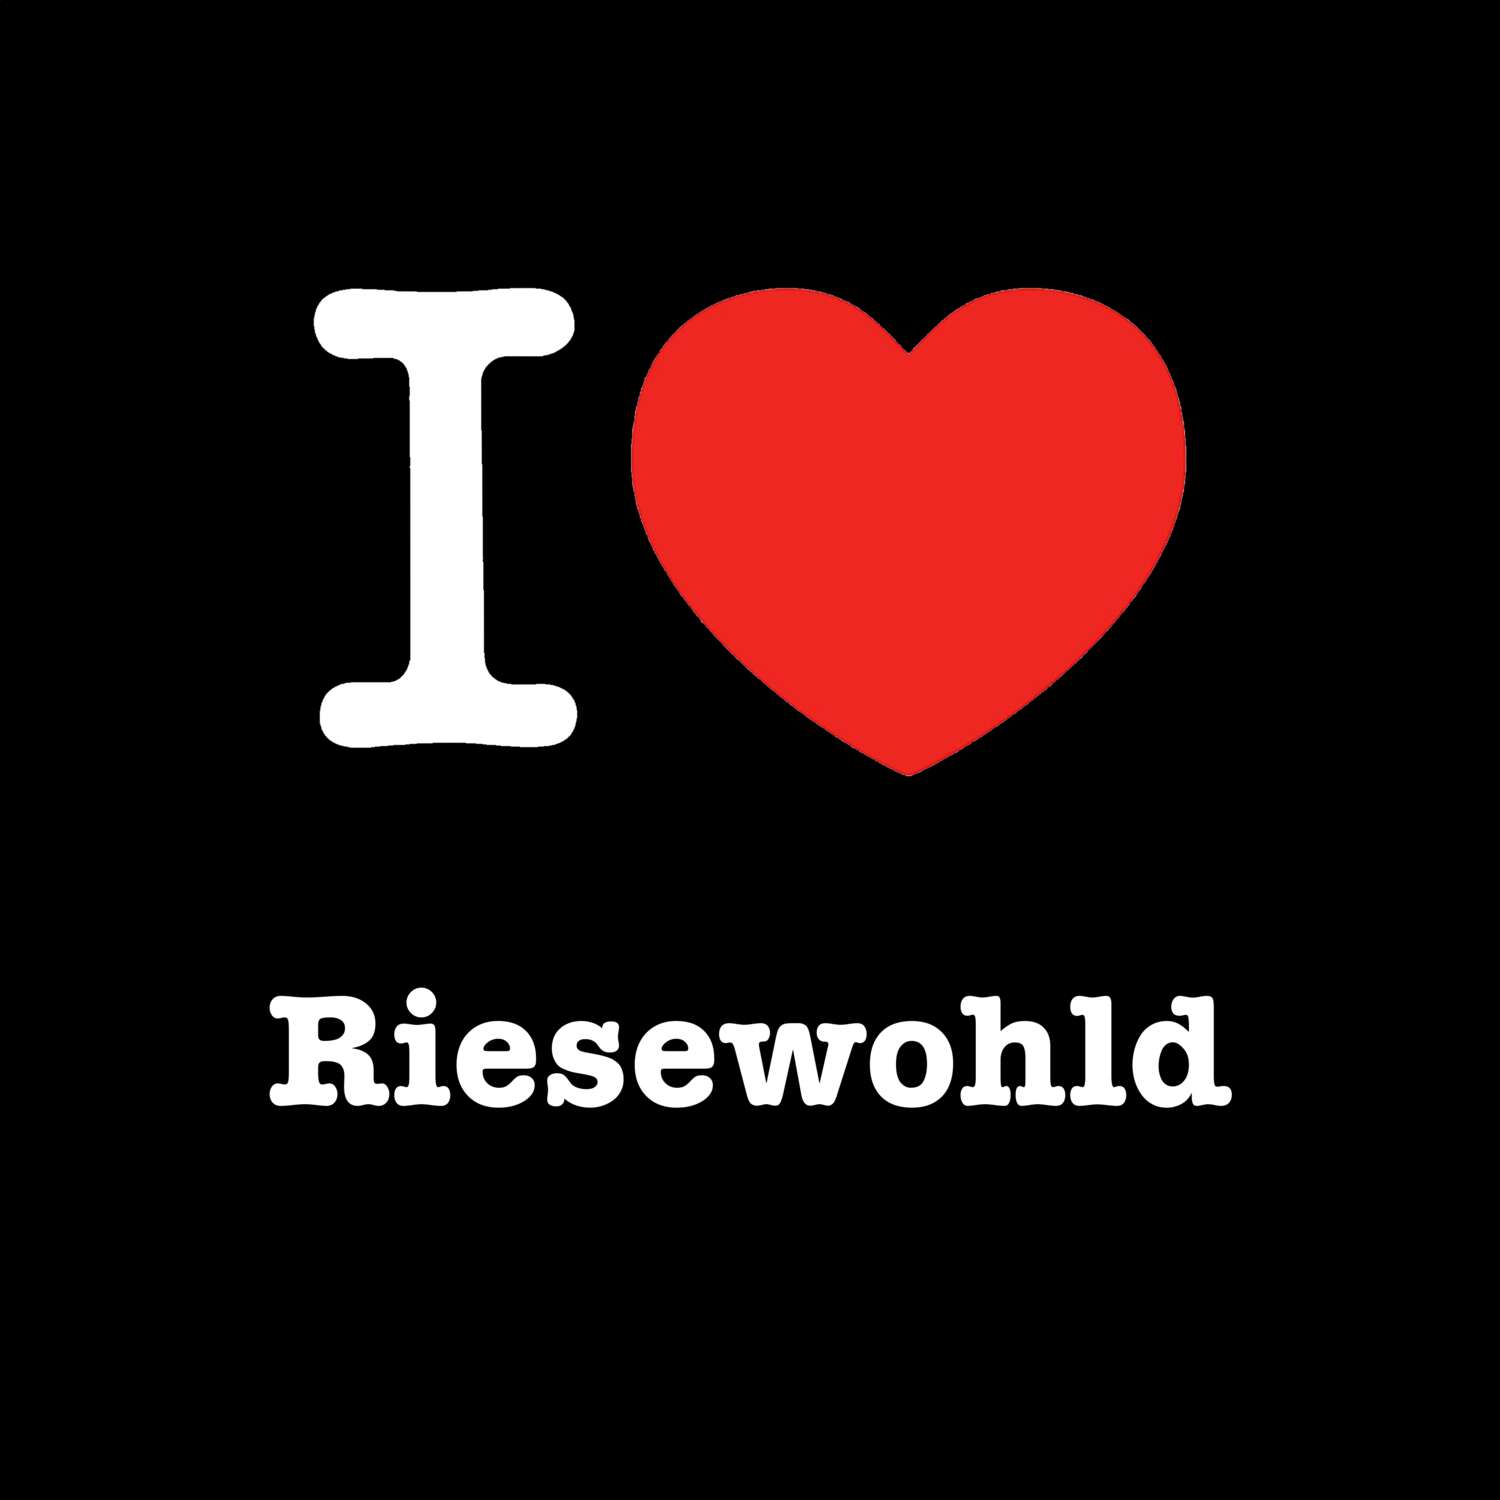 Riesewohld T-Shirt »I love«